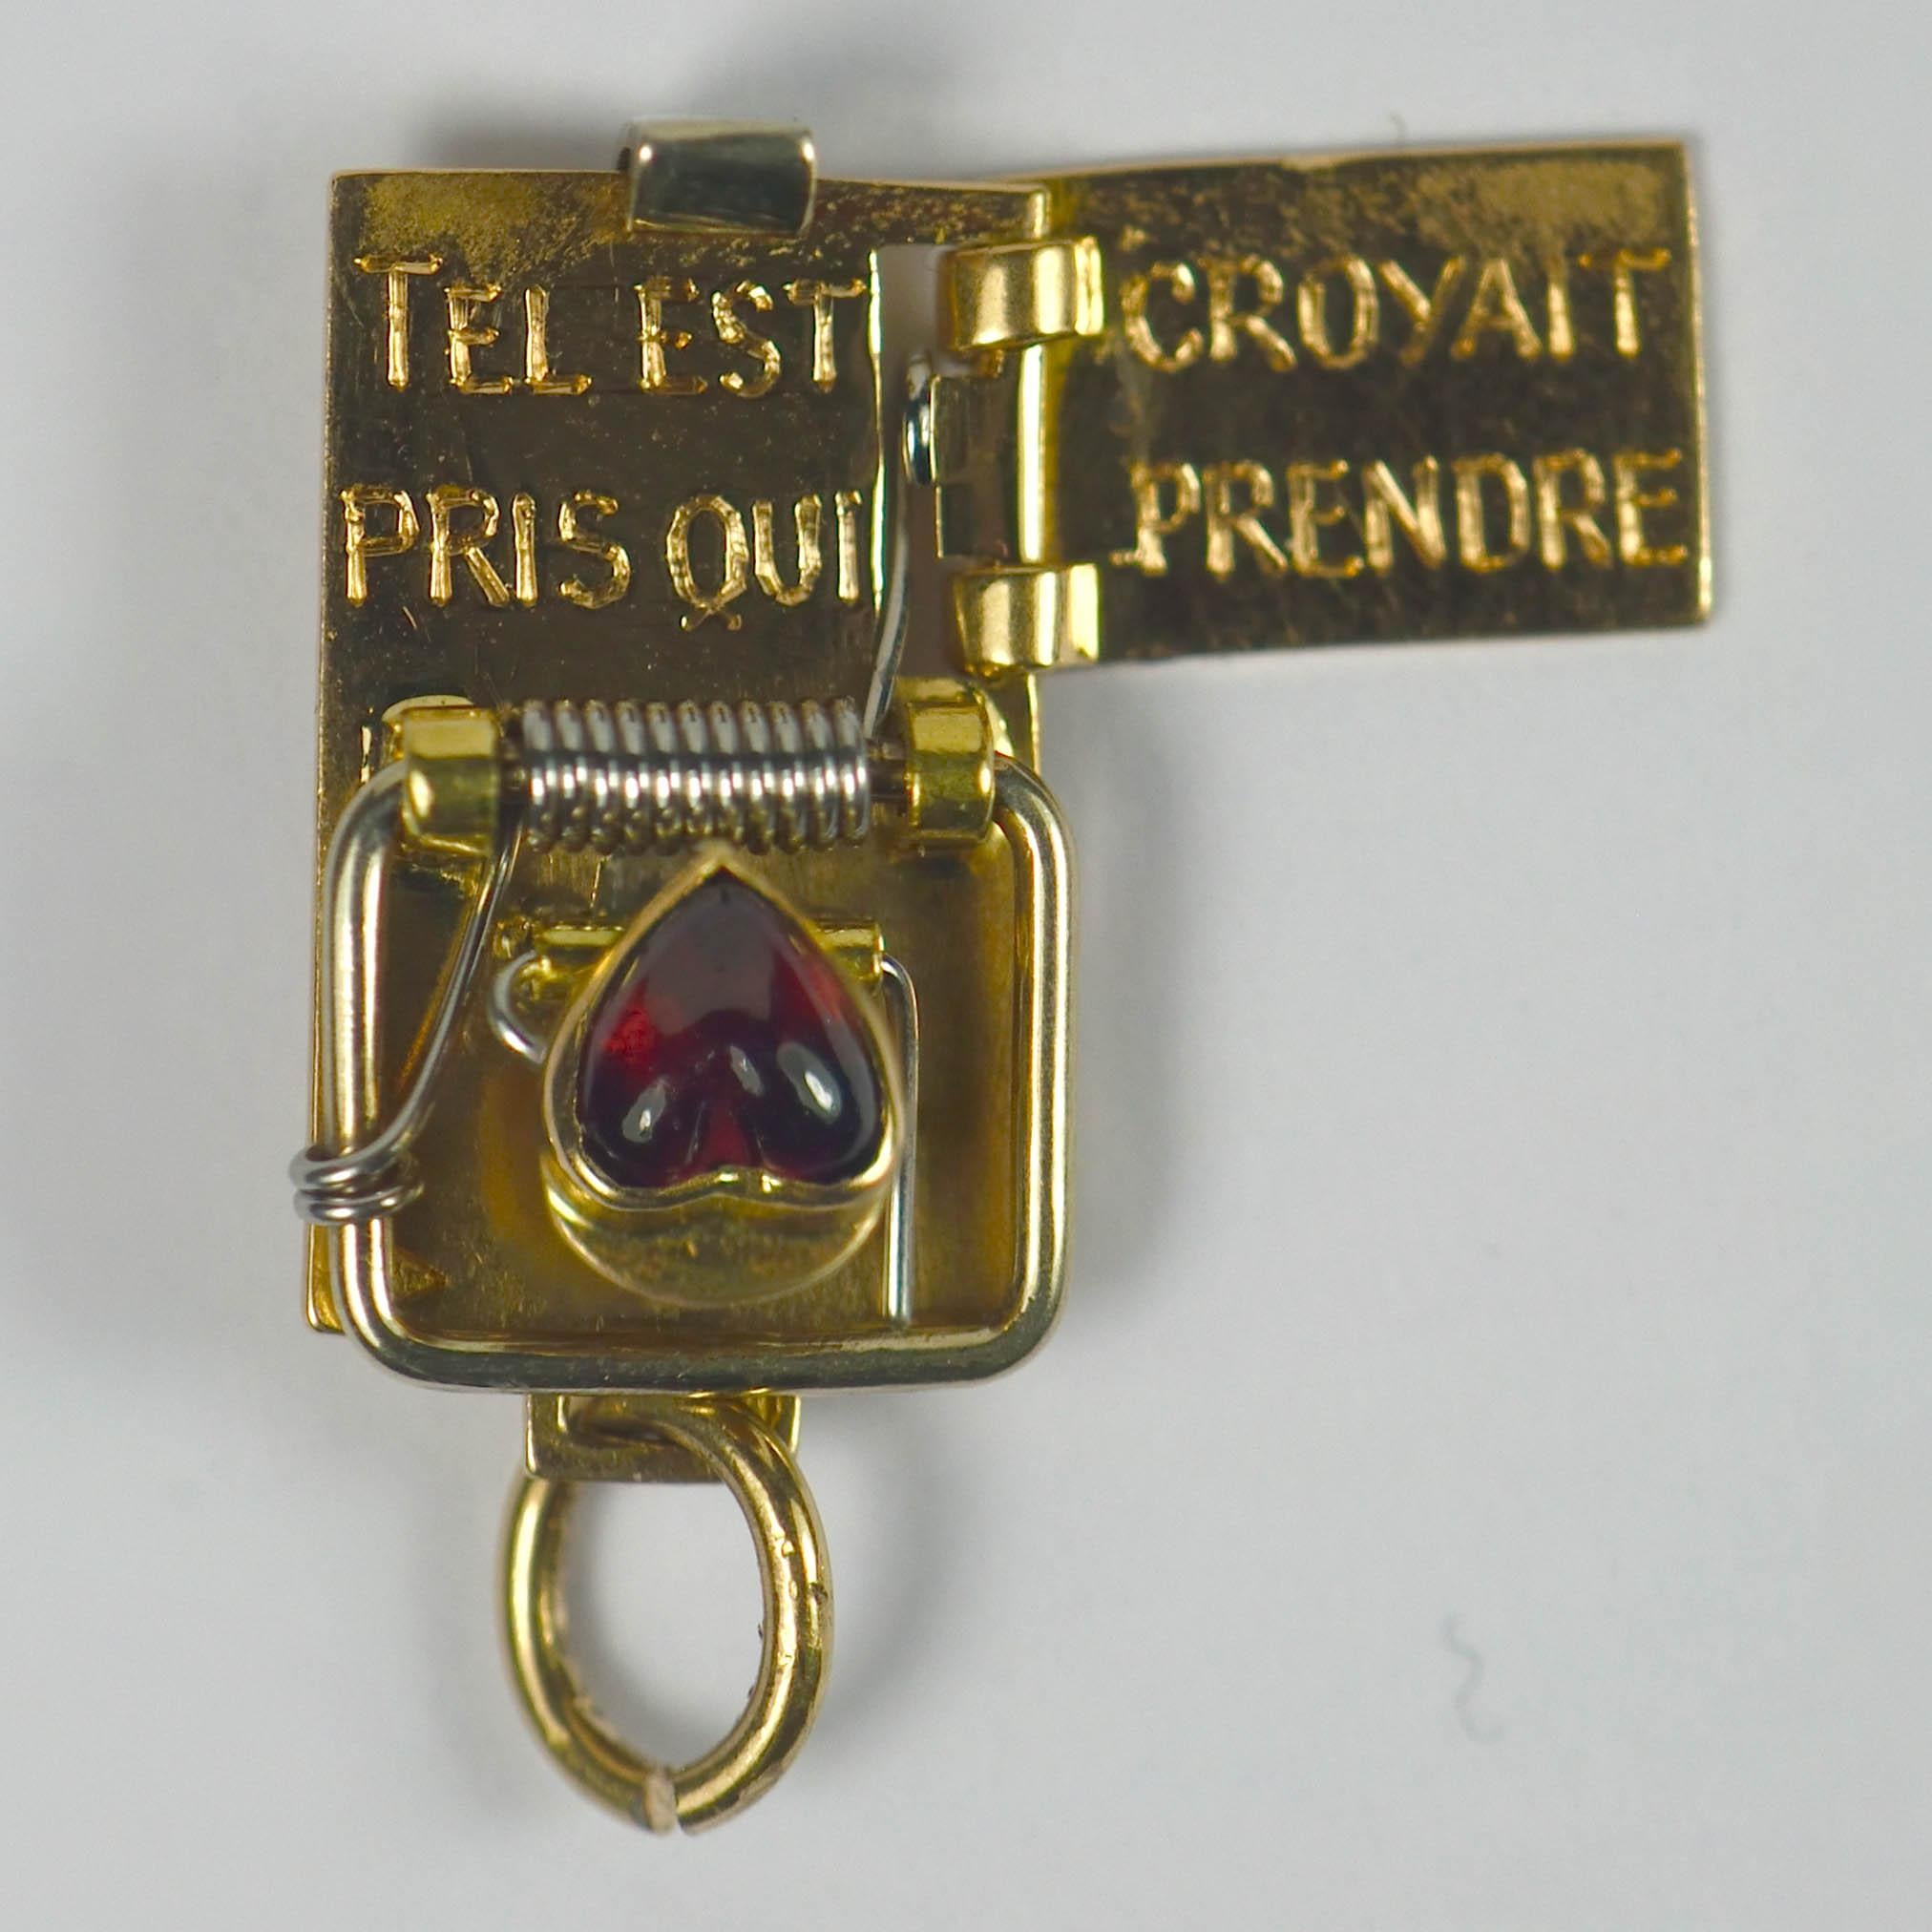 An rare and unusual French charm pendant designed as a garnet heart in a mouse trap, which opens with a slide mechanism to the reverse to reveal the words 